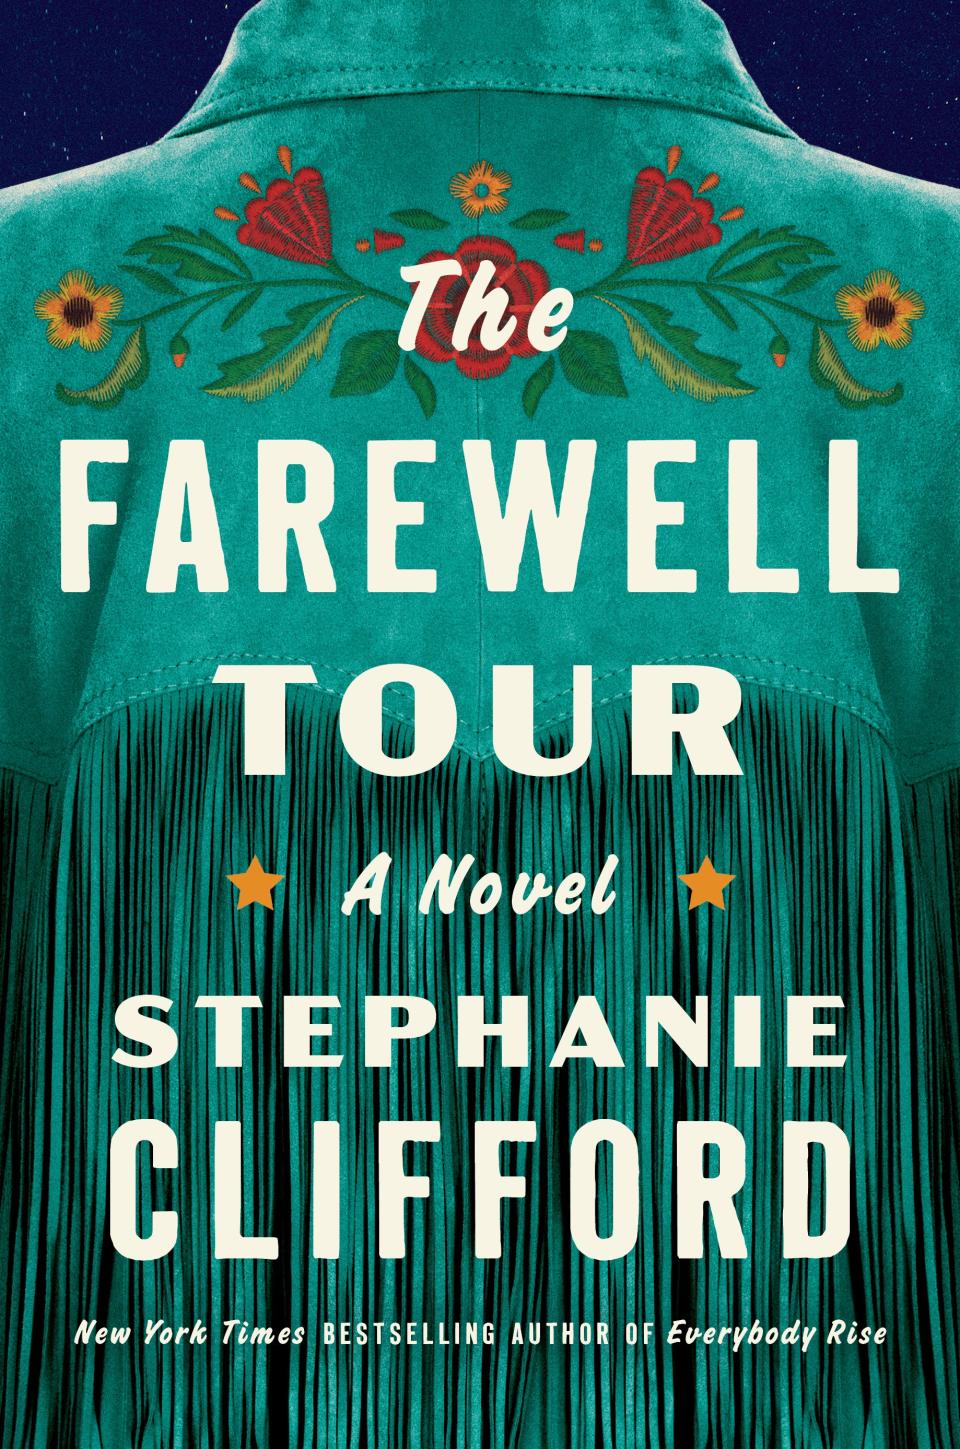 Book artwork for "The Farewell Tour," a country music novel by Stephanie Clifford.